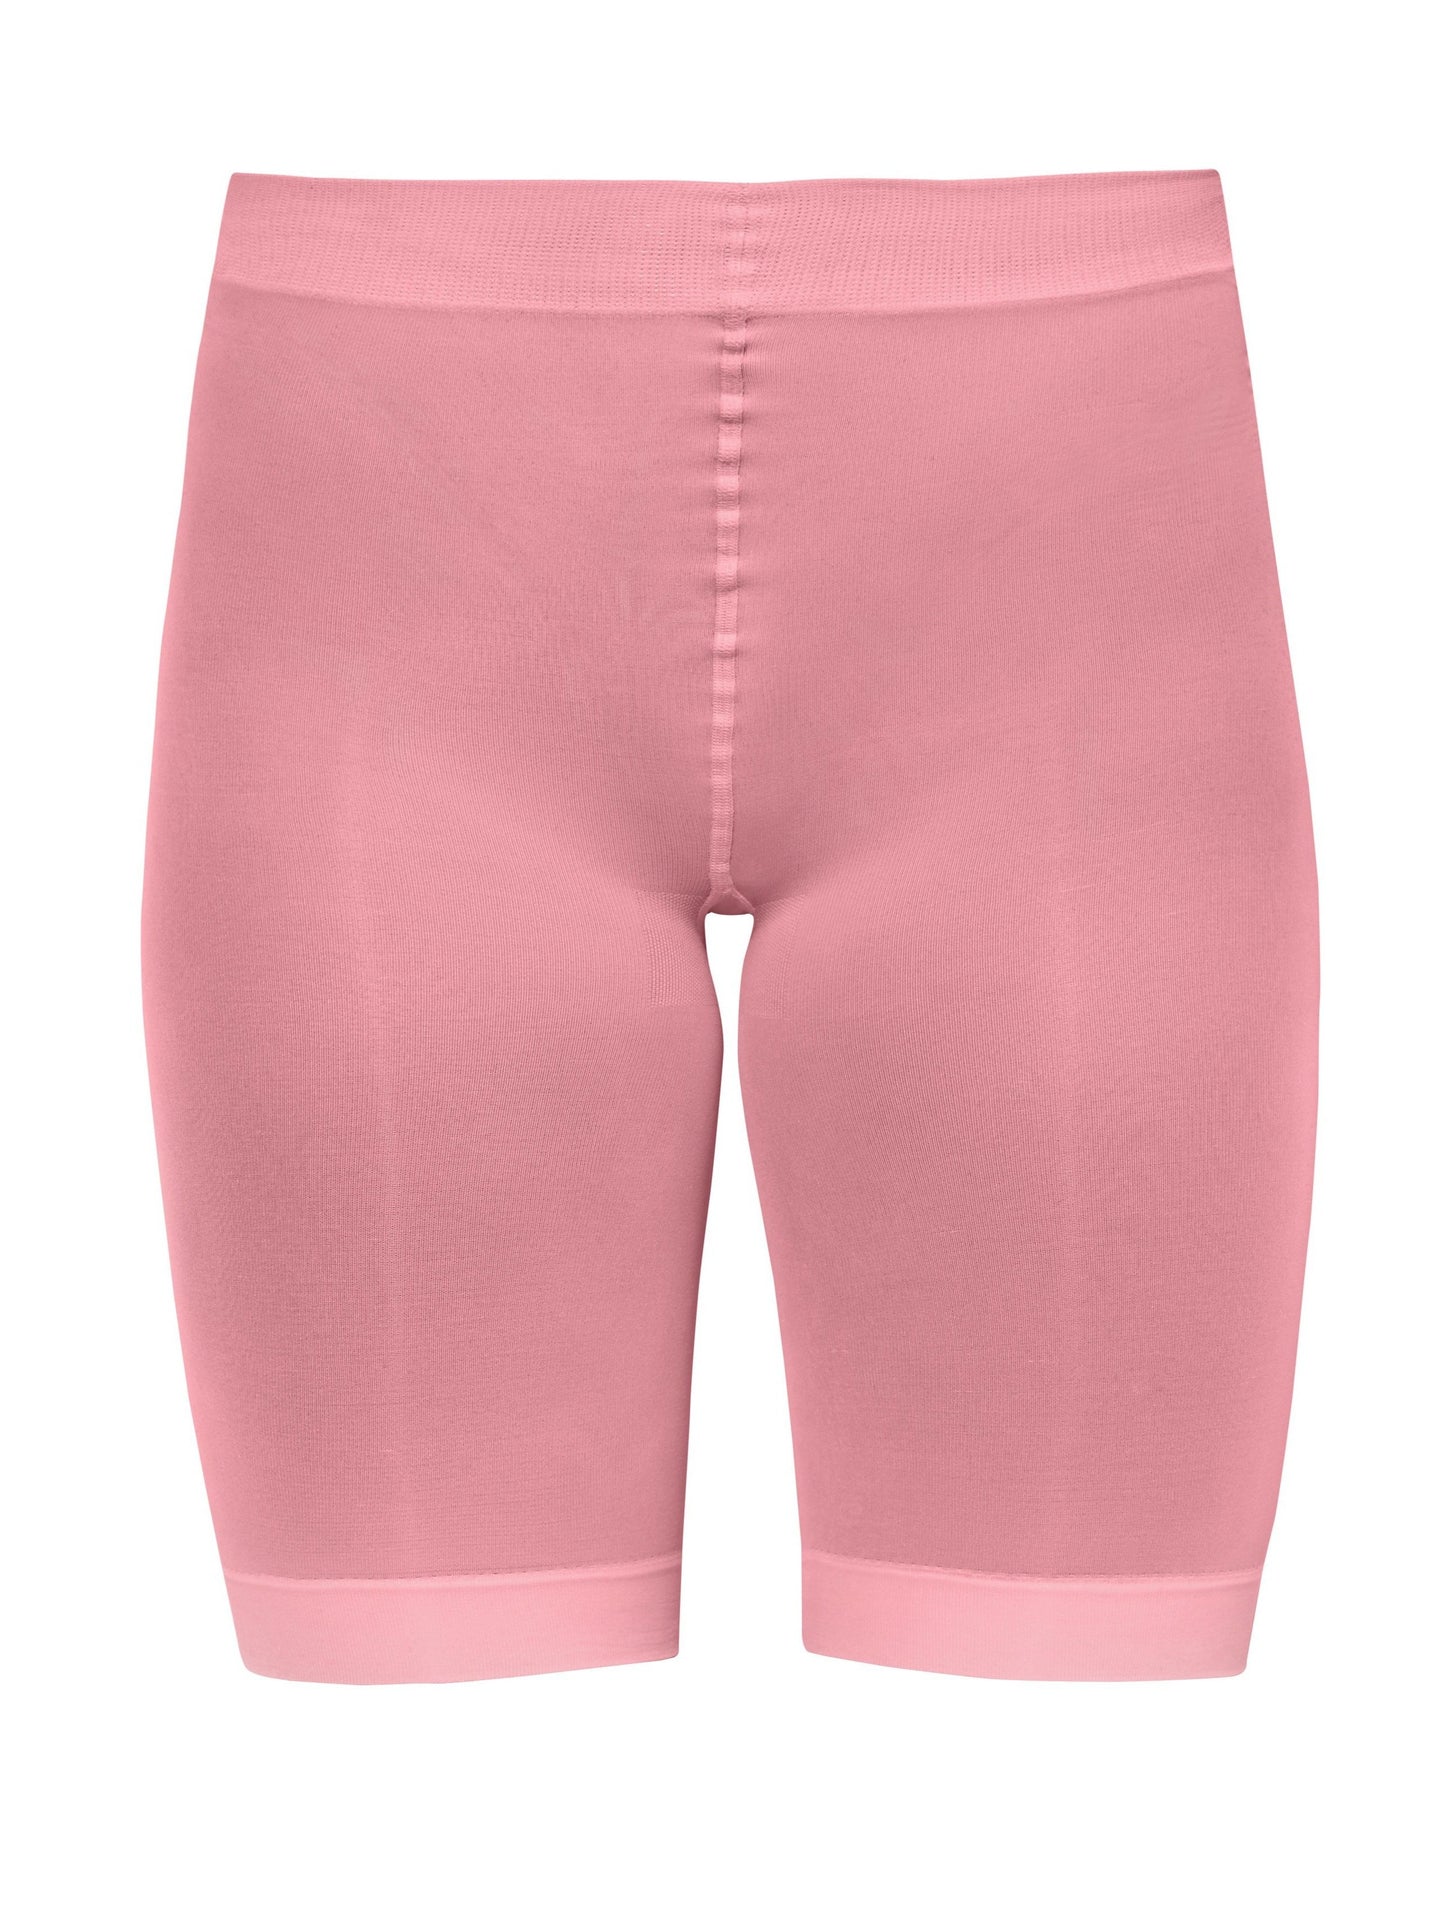 Sneaky Fox Microfibre Shorts - Light pastel pink soft matte opaque knee length bicycle short tights with cotton gusset and flat seams.